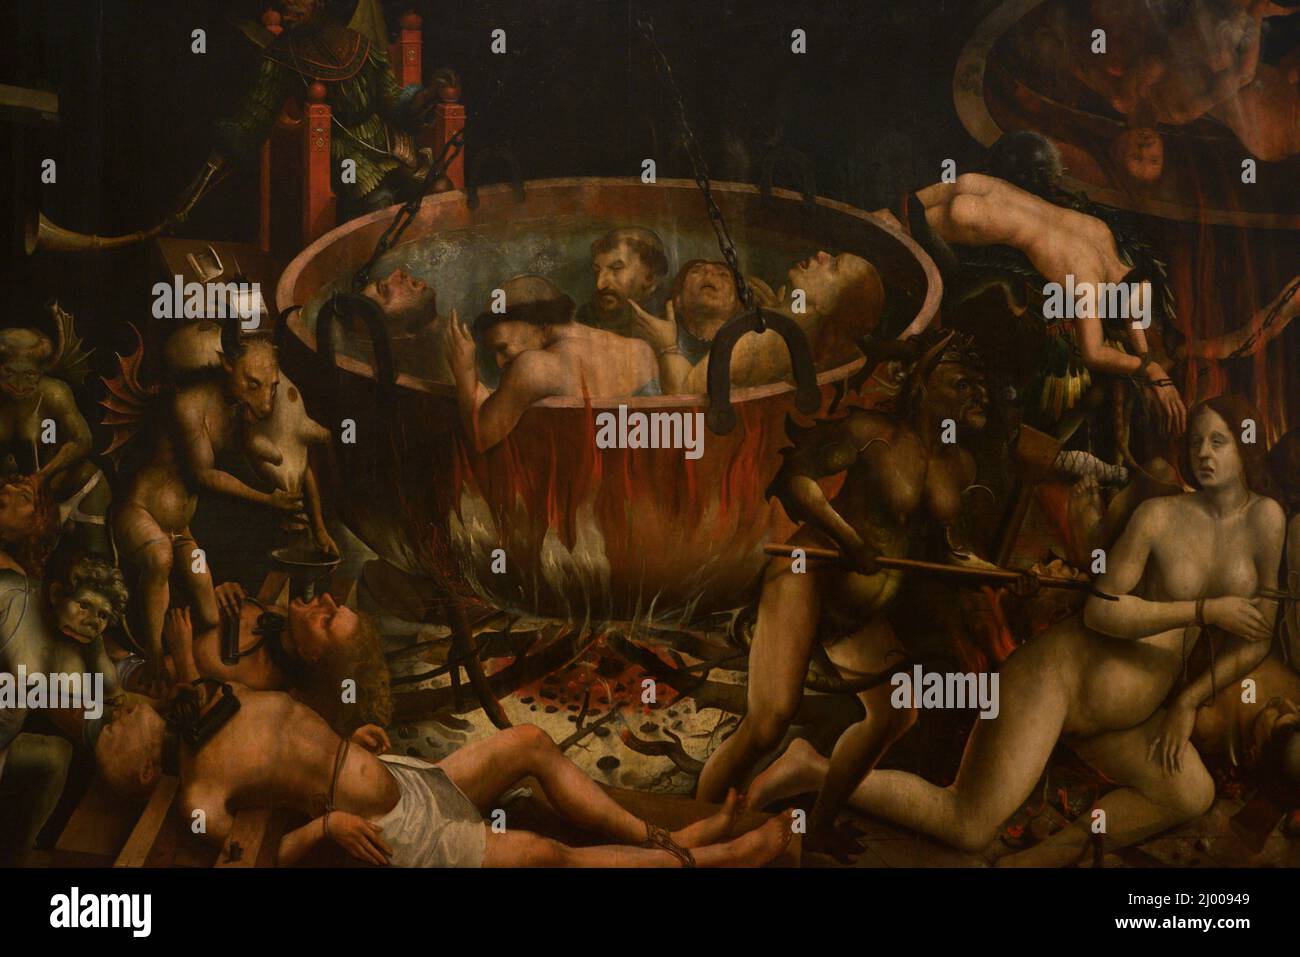 'The Hell'. Unknown master. Oil on oak panel, 1510-1520 (119 x 217,5 cm). Detail. From a convent abolished in 1834. National Museum of Ancient Art. Lisbon, Portugal. Stock Photo